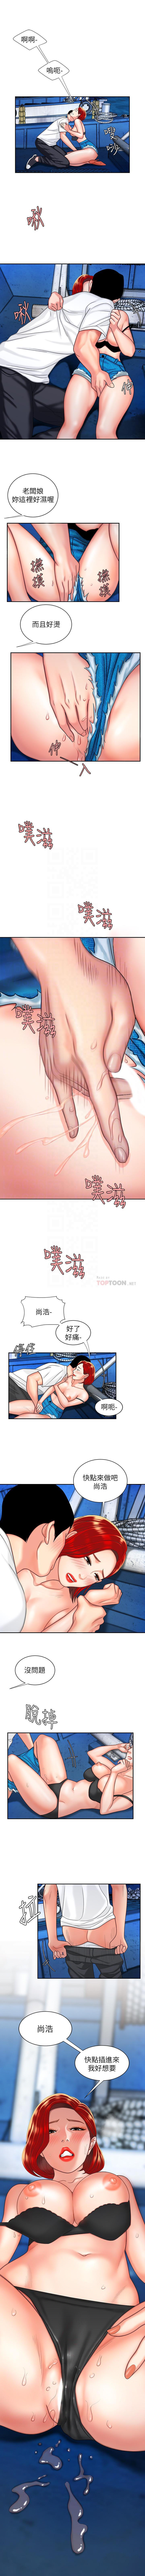 DELIVERY MAN | 幸福外卖员 Ch. 7 [Chinese] 